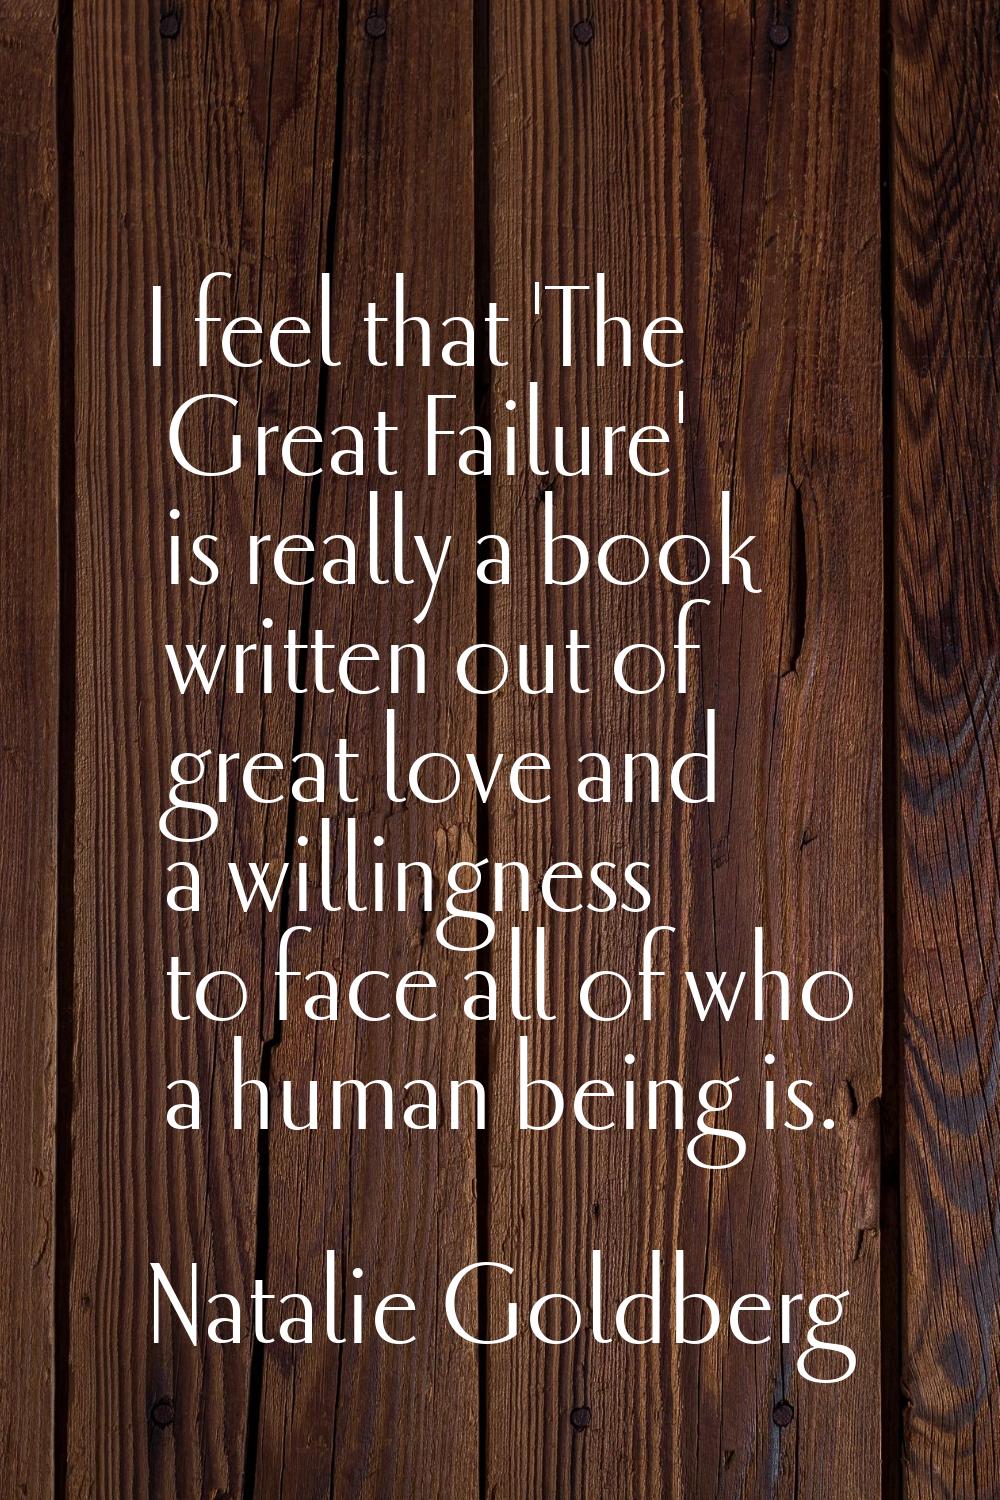 I feel that 'The Great Failure' is really a book written out of great love and a willingness to fac